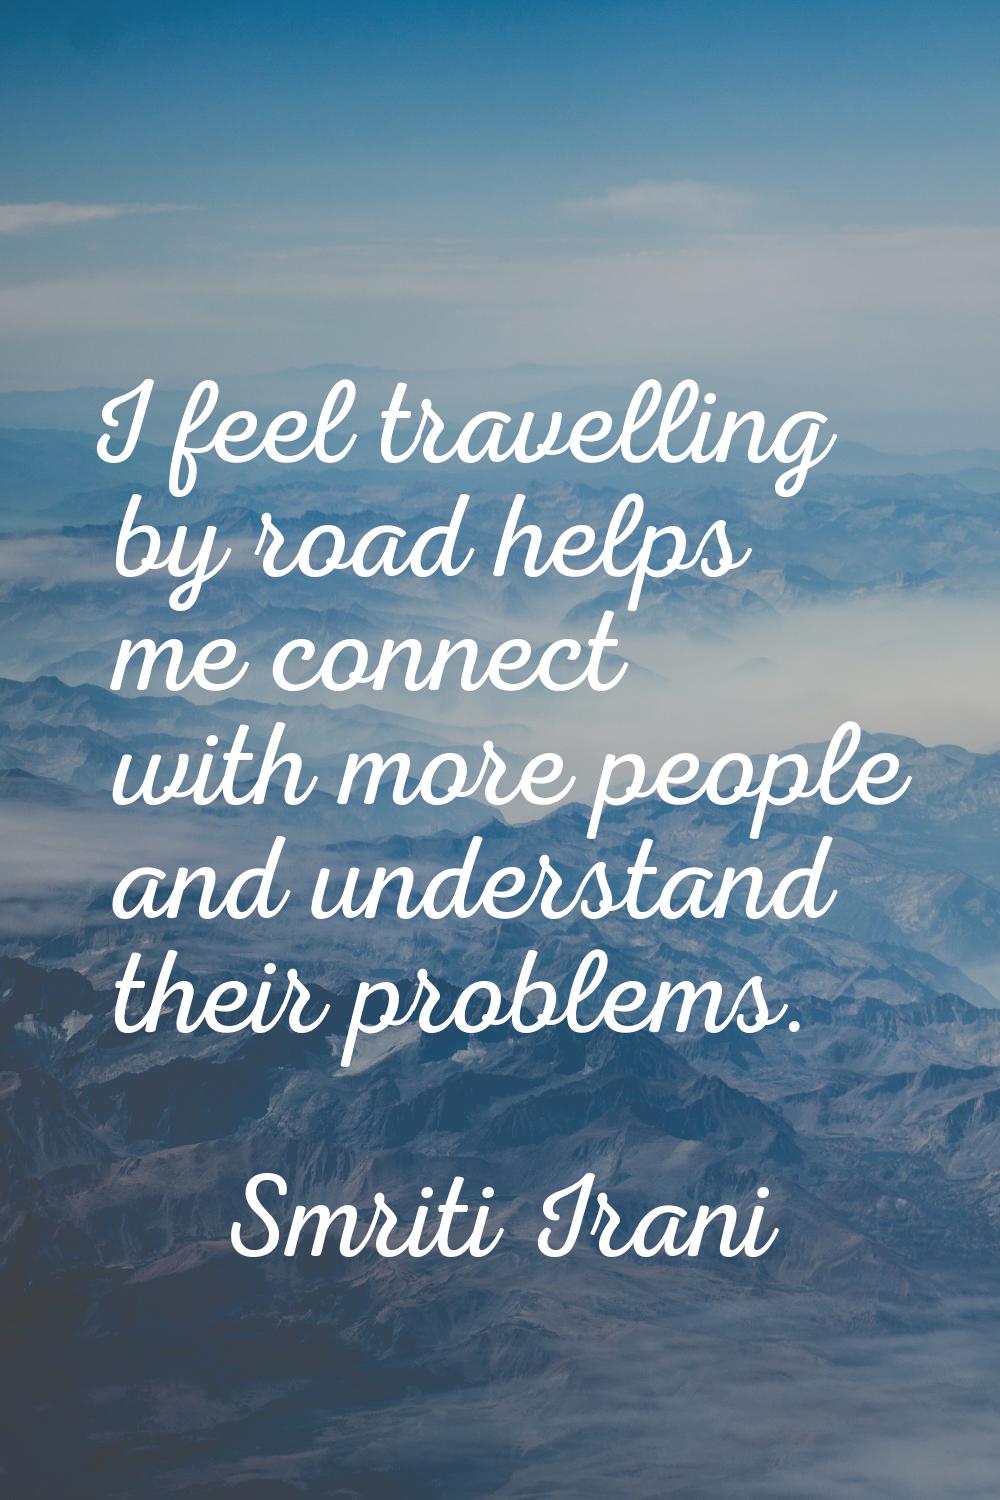 I feel travelling by road helps me connect with more people and understand their problems.